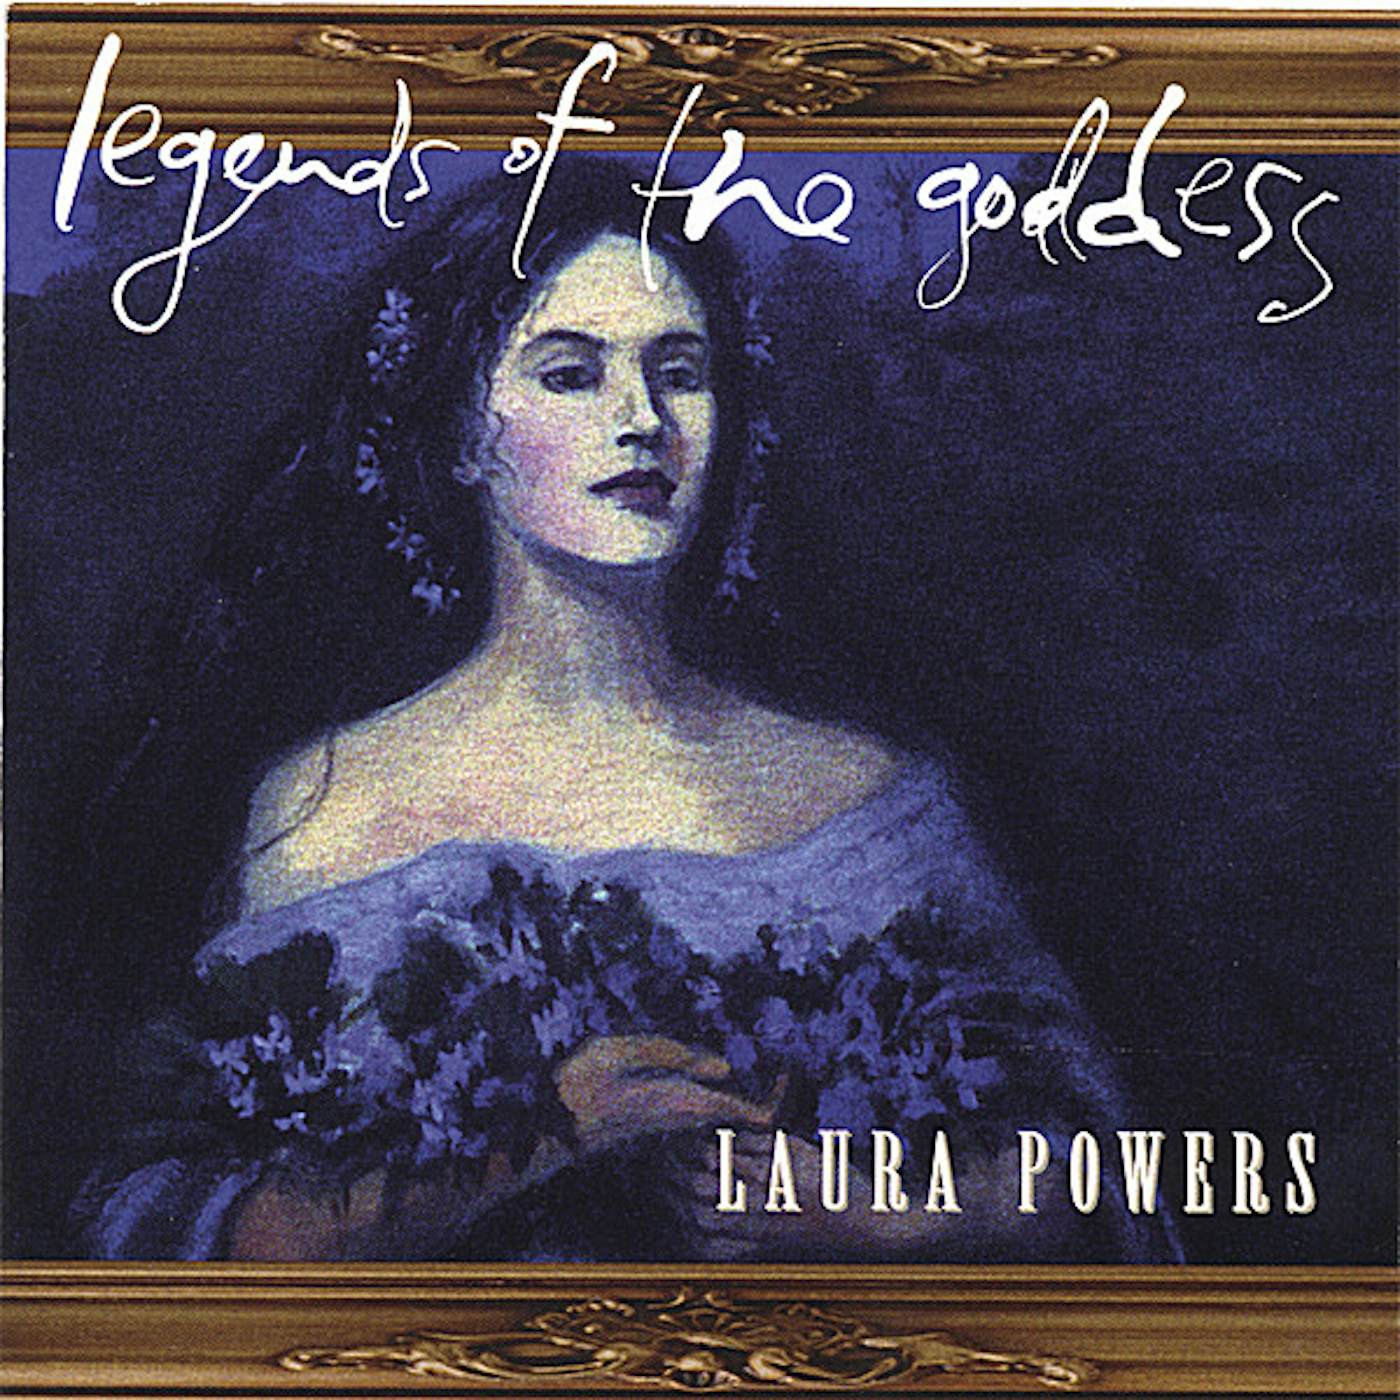 Laura Powers LEGENDS OF THE GODDESS CD